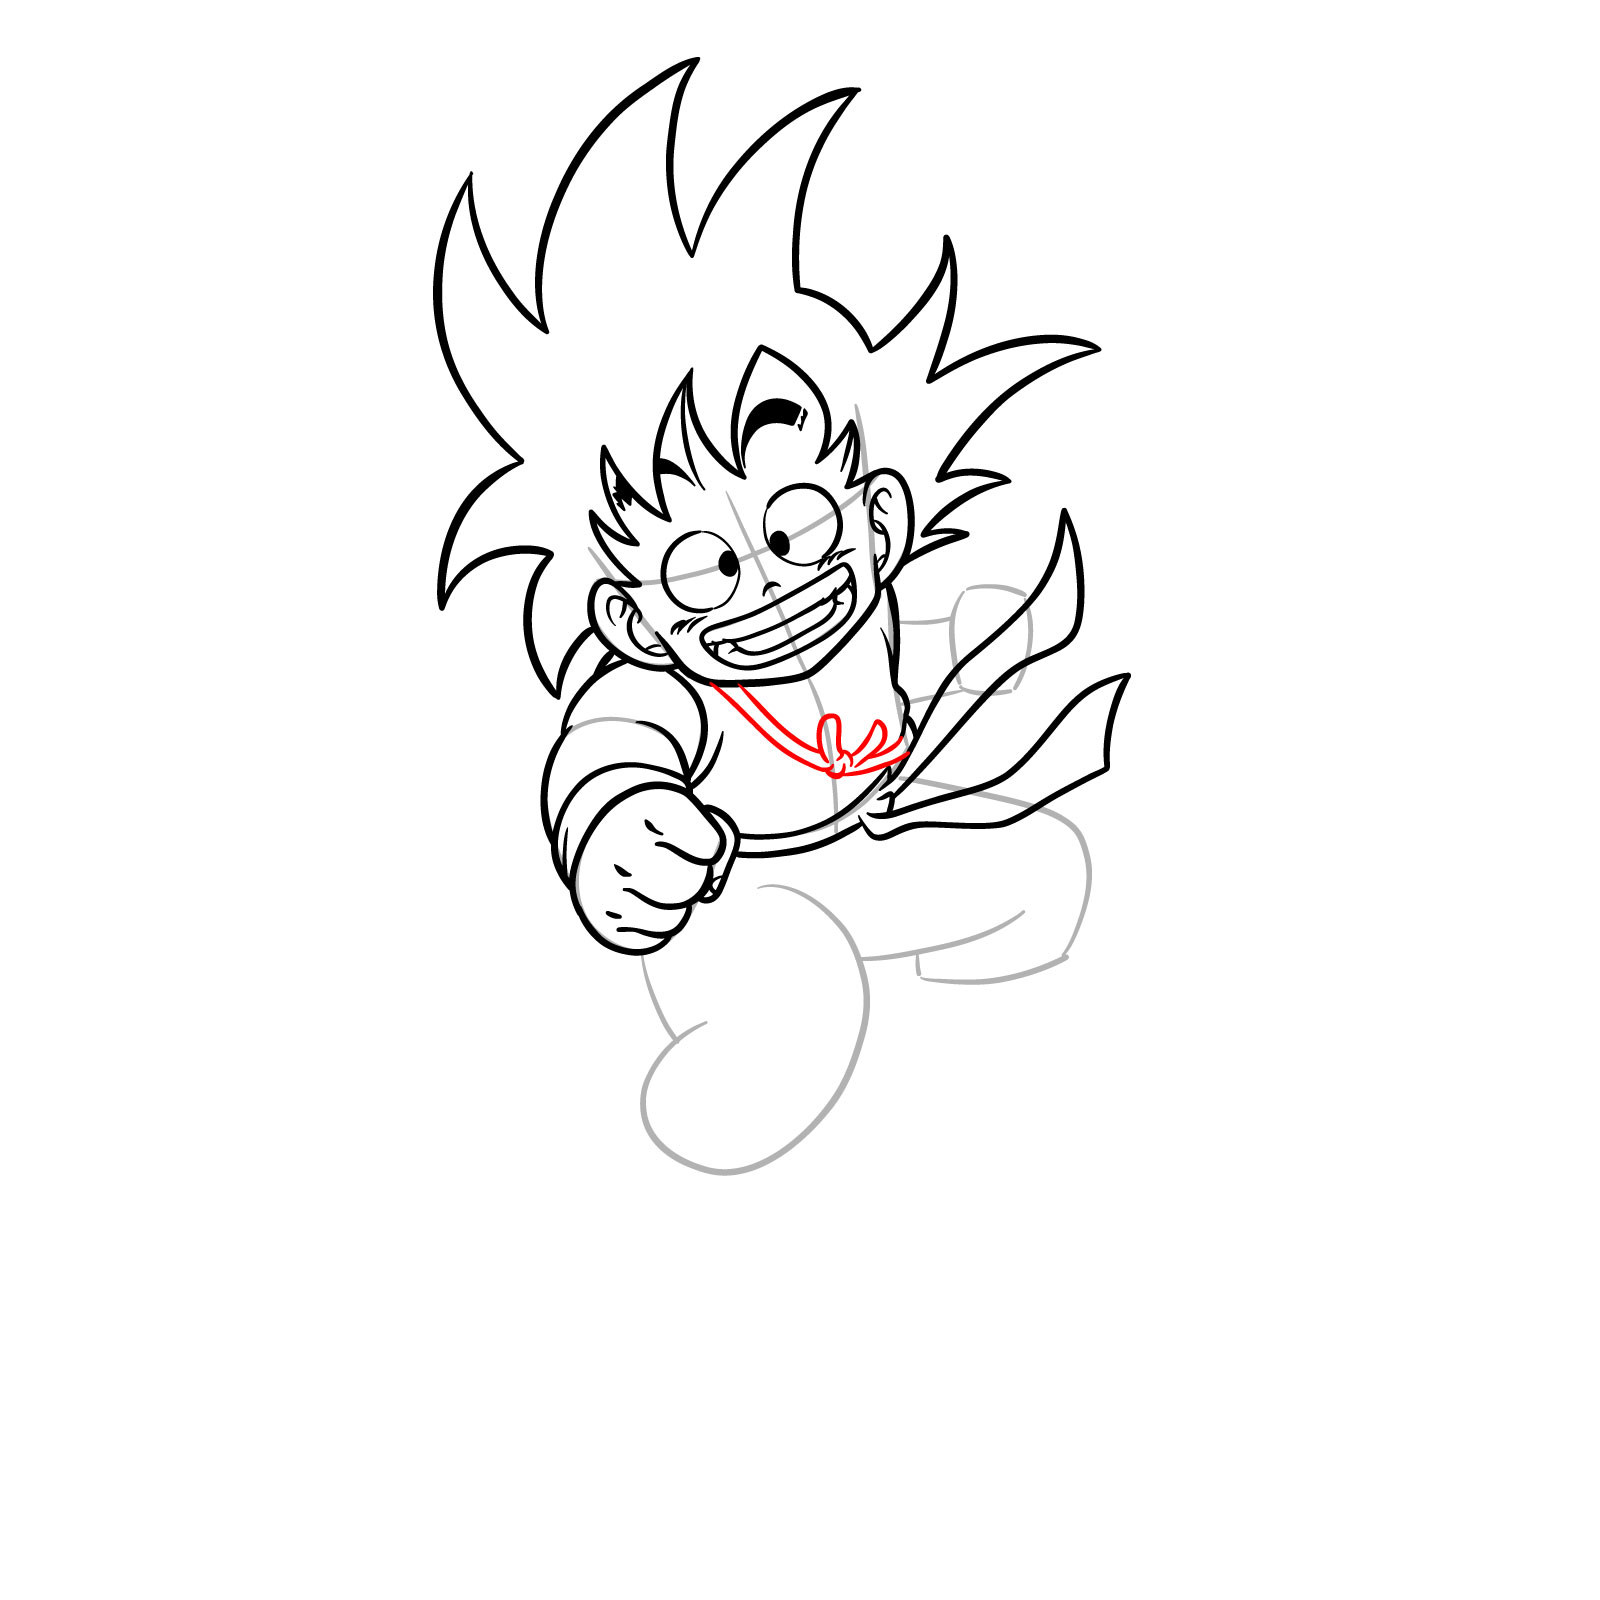 How to draw Kid Goku riding on the Flying Nimbus - step 16